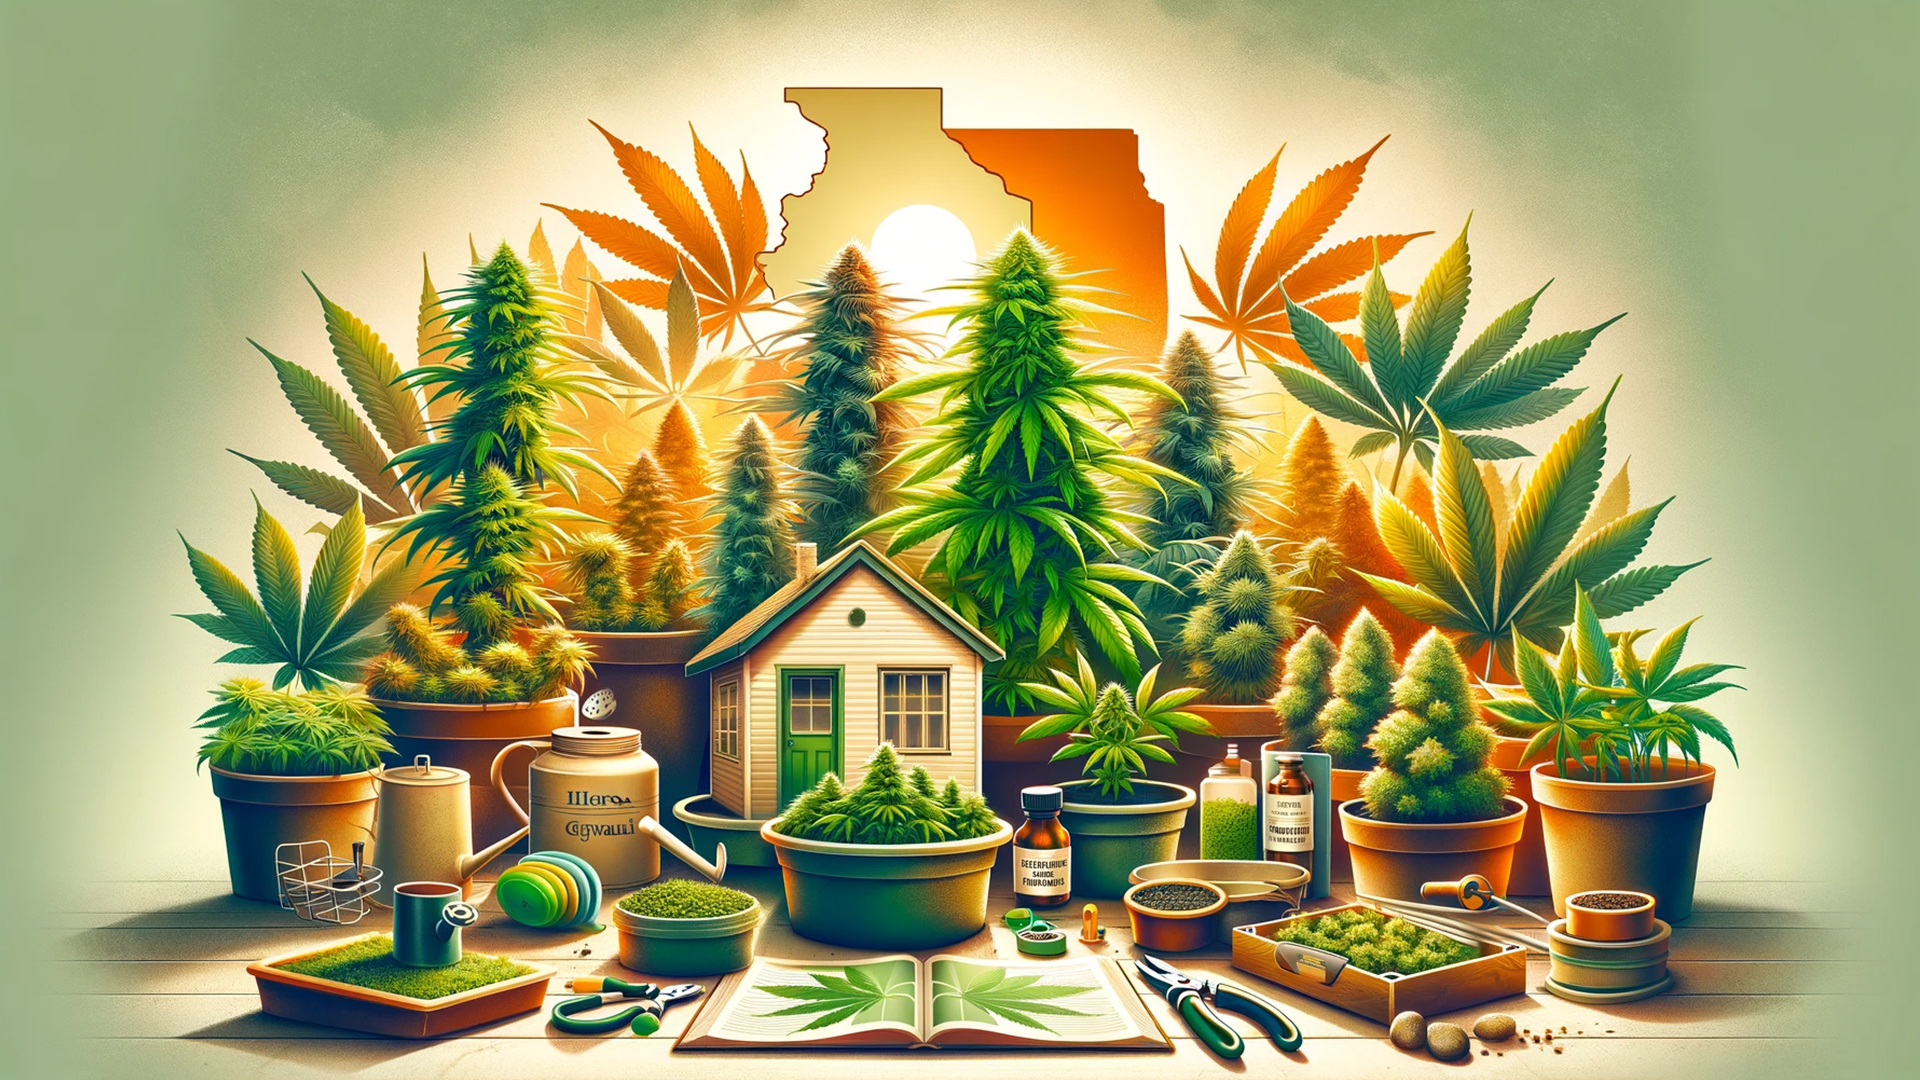 An inviting and vibrant image showcasing home cannabis cultivation with lush plants, gardening tools, and subtle Illinois symbols